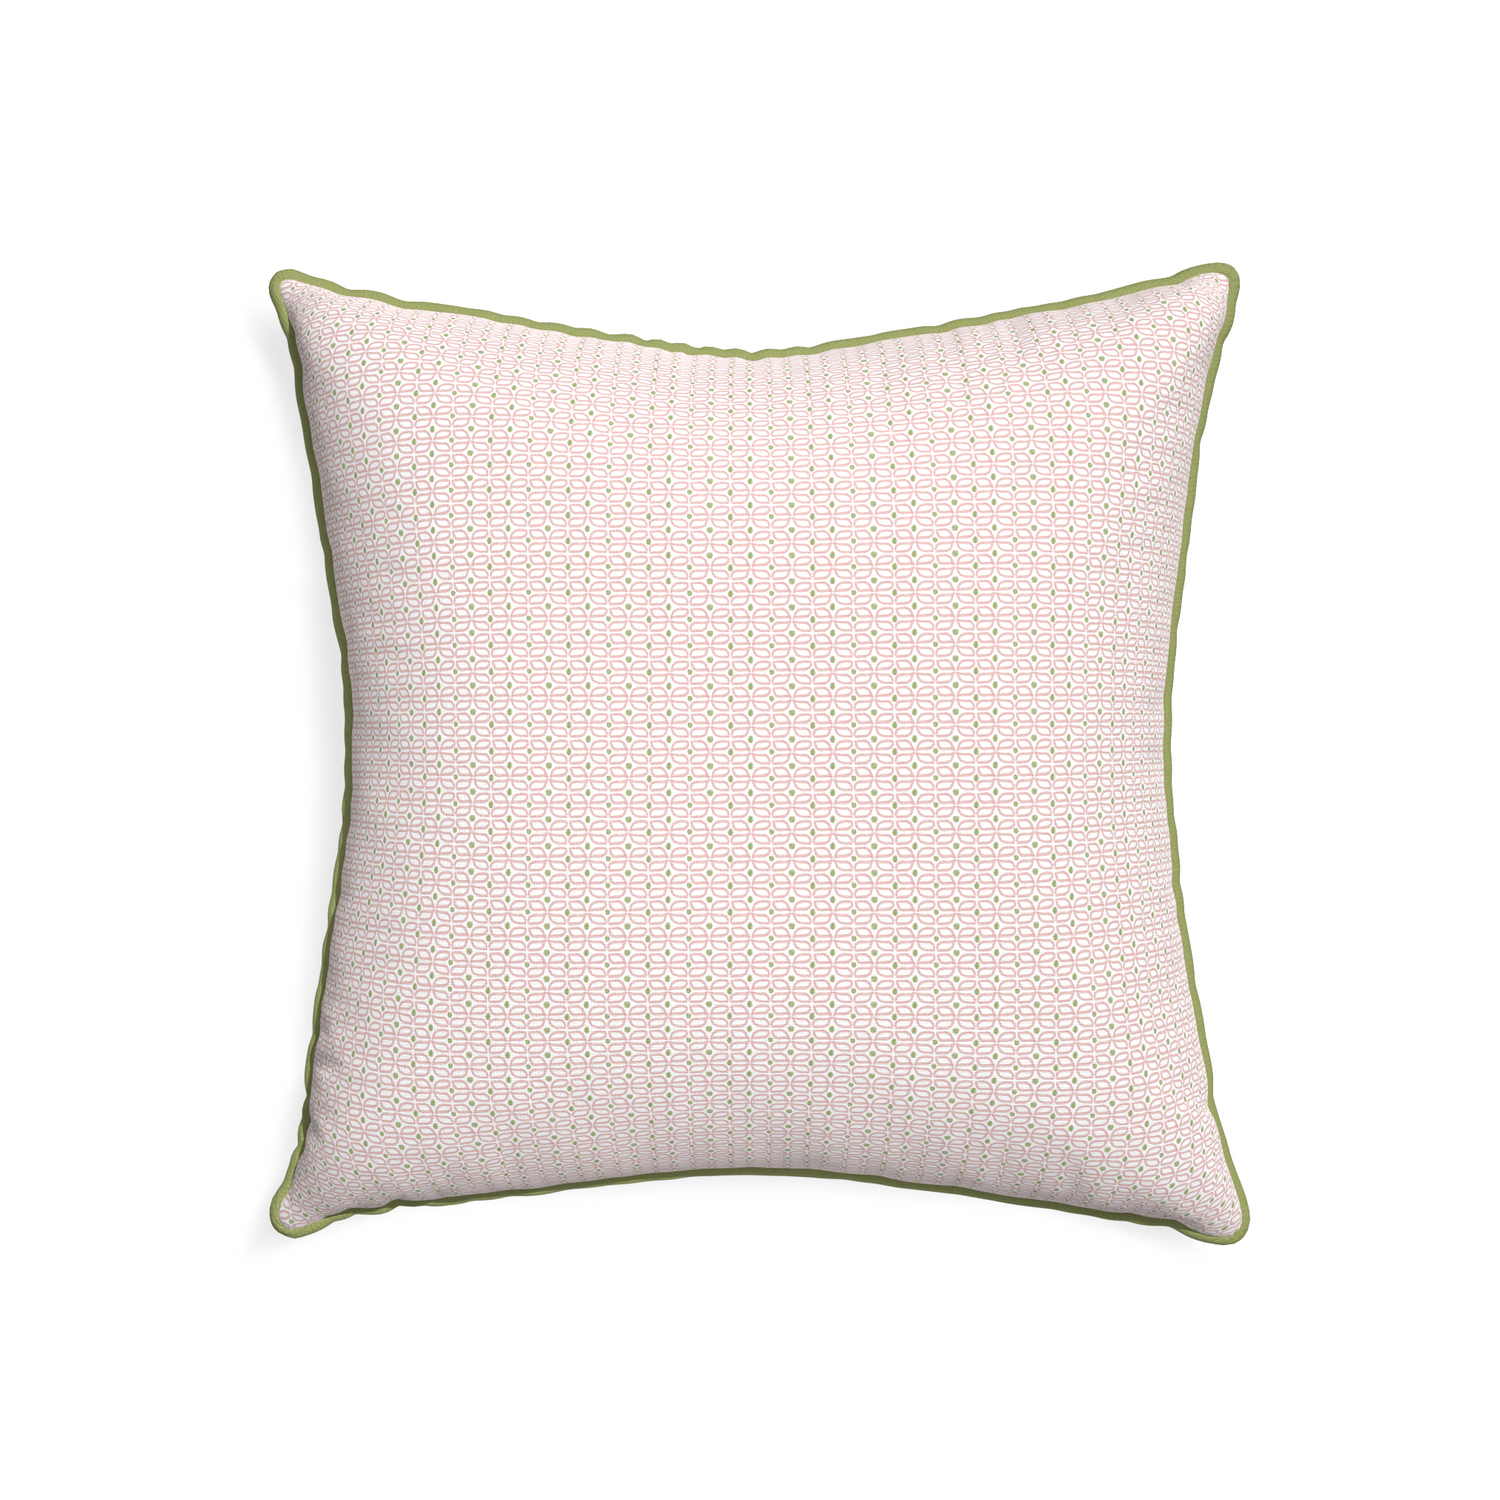 22-square loomi pink custom pink geometricpillow with moss piping on white background